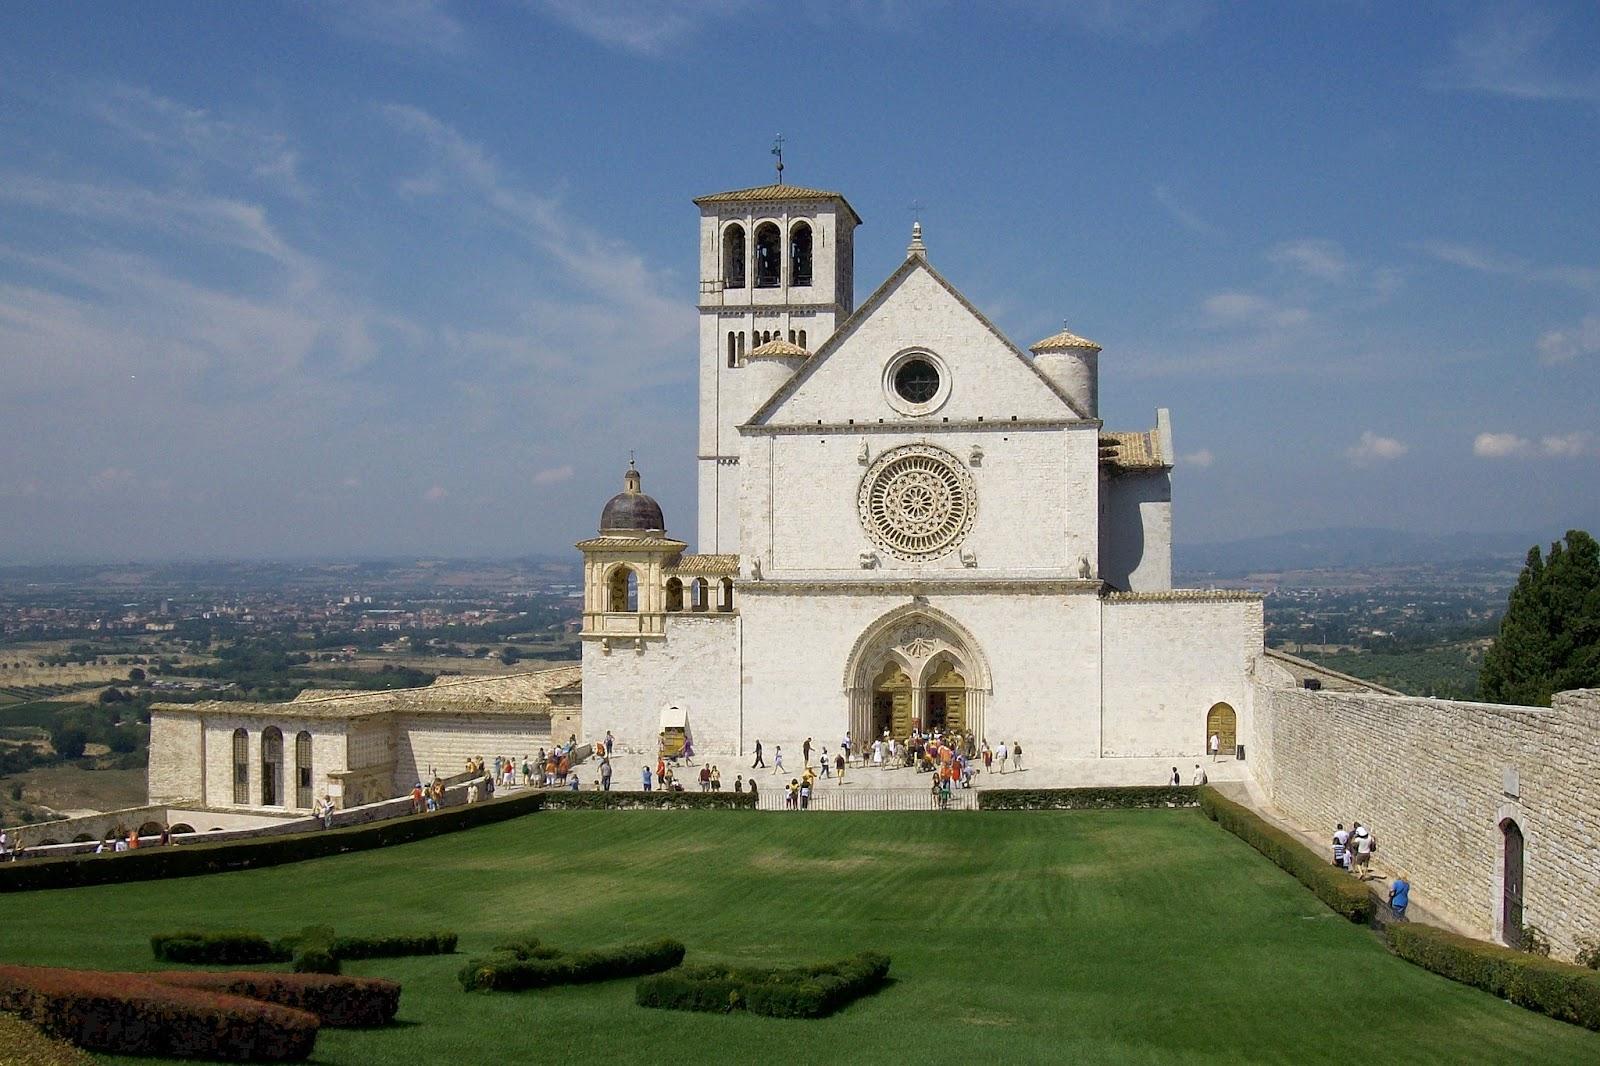 A photo of the Italian cathedral and monastery, Basilica of St. Francis of Assisi, along with a vast backdrop of the Italian city of Assisi.